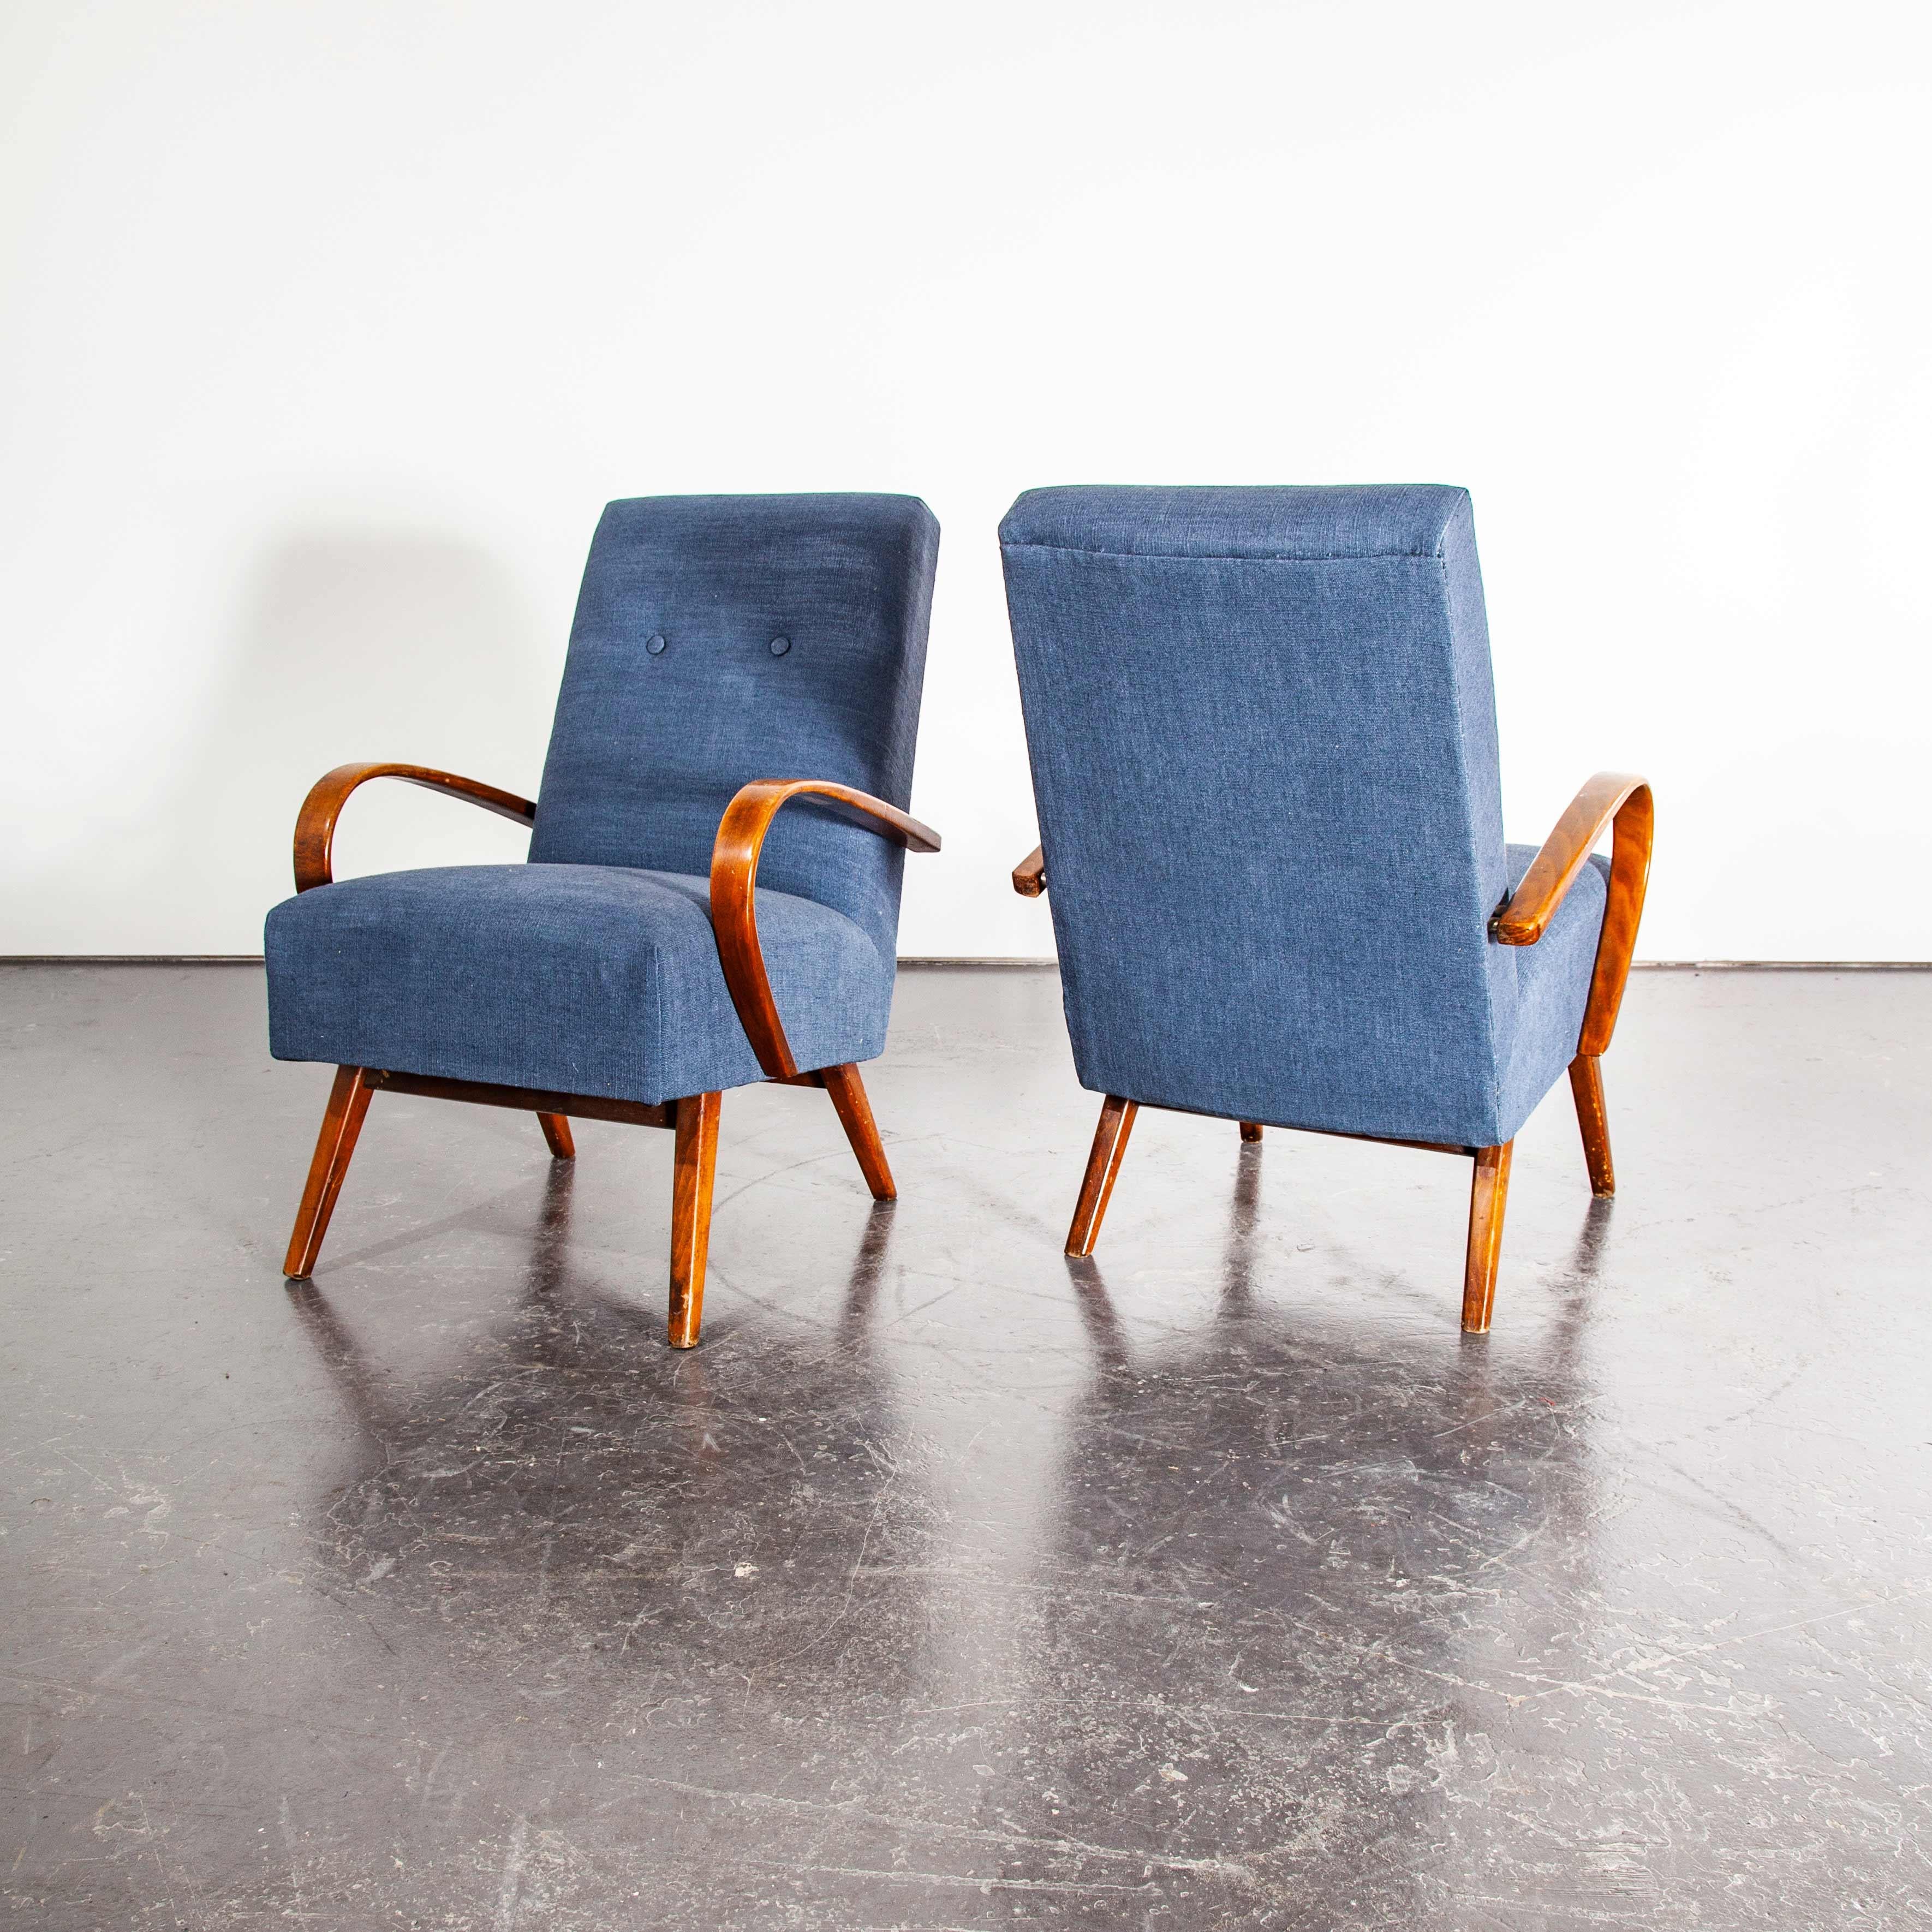 1930s pair of upholstered arm chairs by Jindrich Halabala.
1950s Pair of upholstered armchairs – Jindrich Halabala. Halabala was a Czech industrial designer, writer, and educator. Halabala was a key force in the development of post war industrially